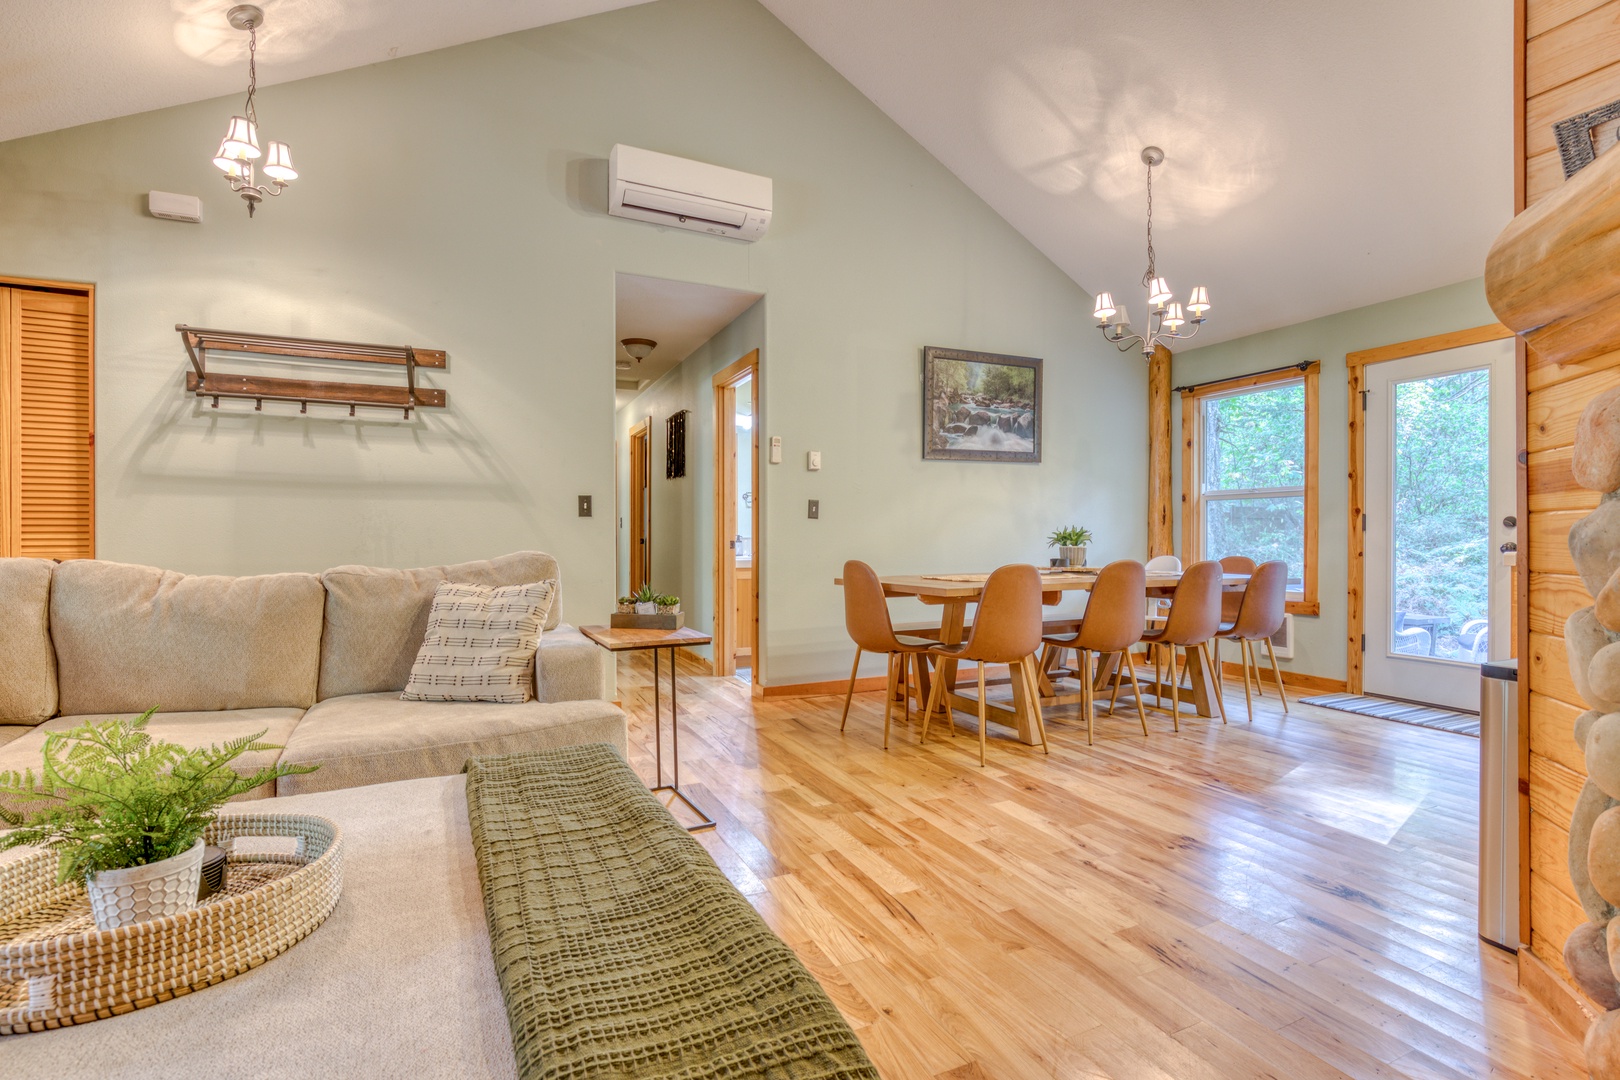 Brightwood Vacation Rentals, Riverside Retreat - The living area is just of the kitchen and dining areas